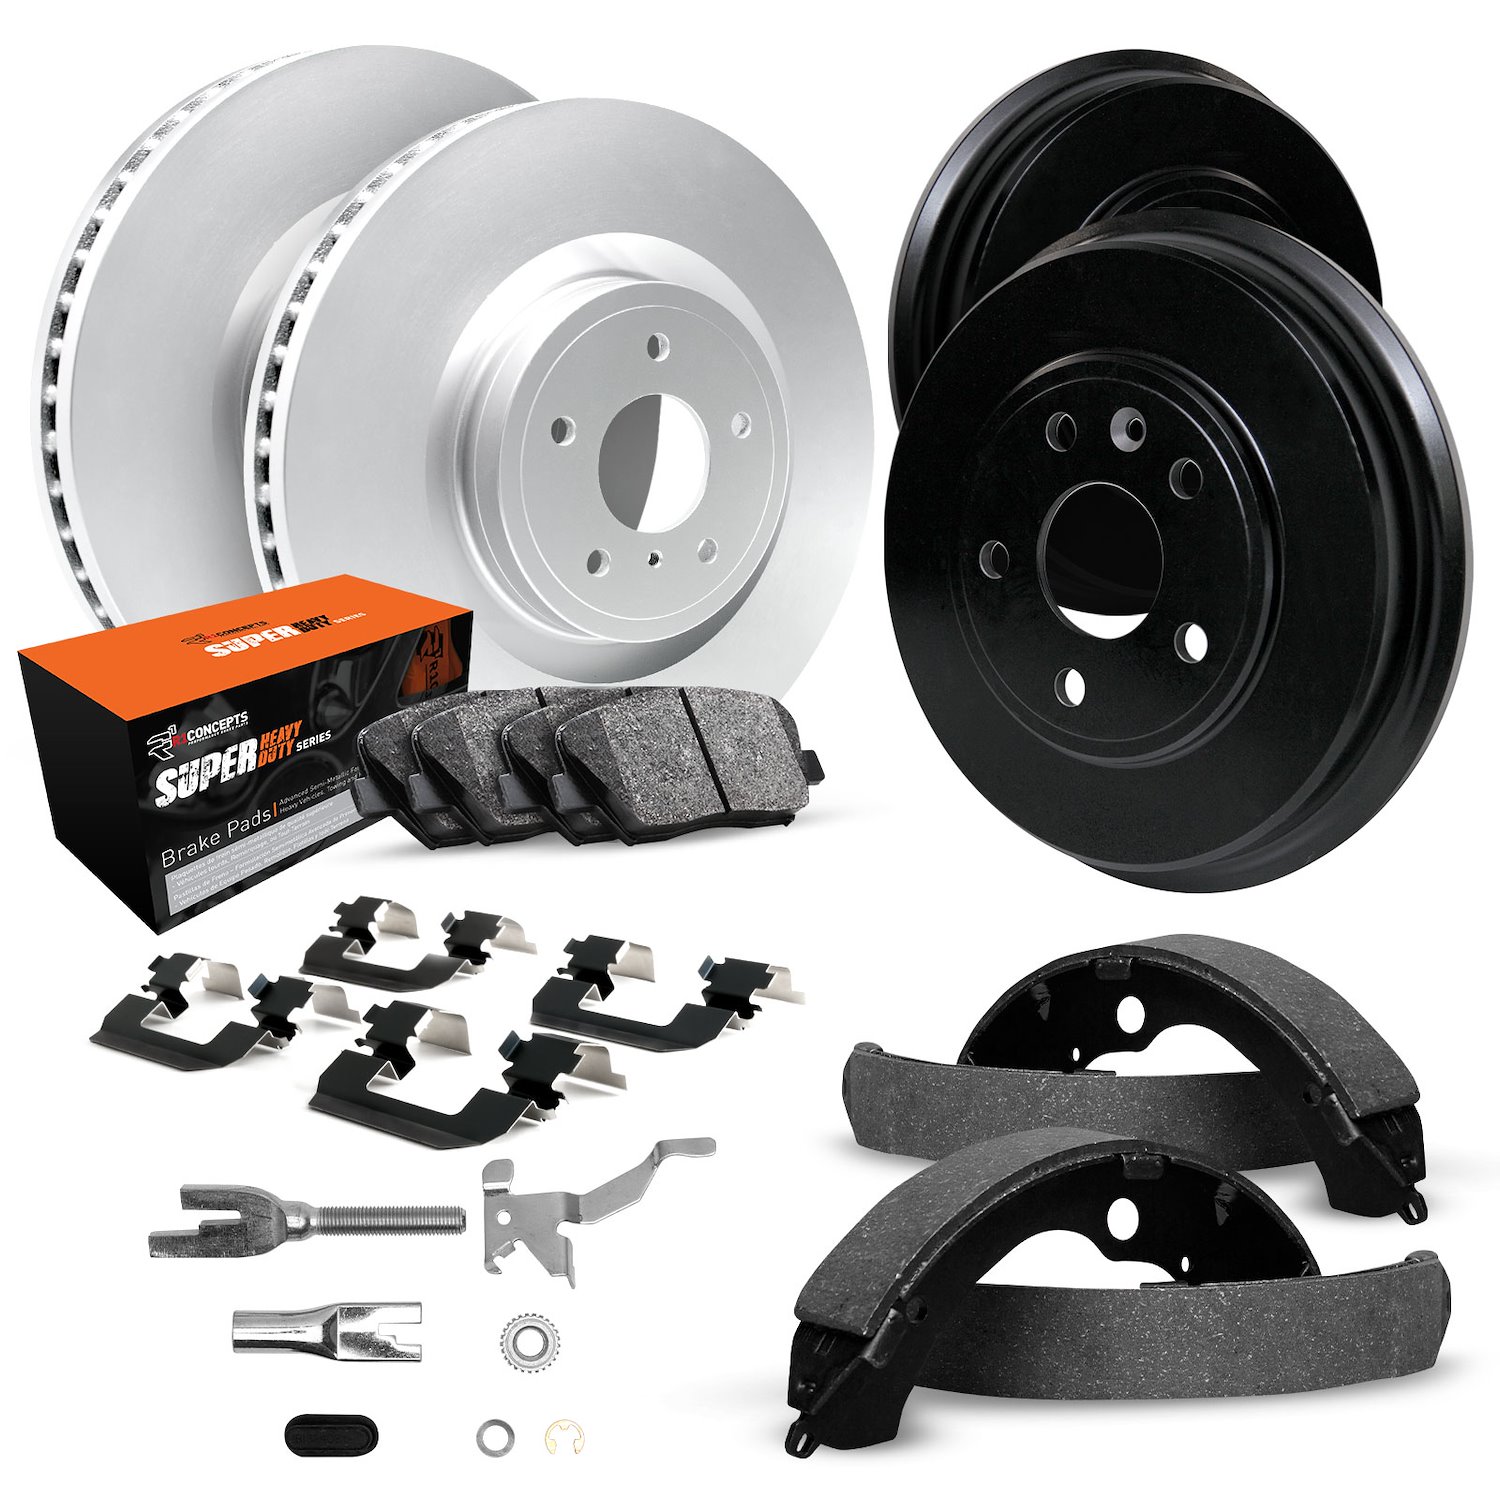 GEO-Carbon Brake Rotor & Drum Set w/Super-Duty Pads, Shoes, Hardware/Adjusters, 1995-2002 Ford/Lincoln/Mercury/Mazda